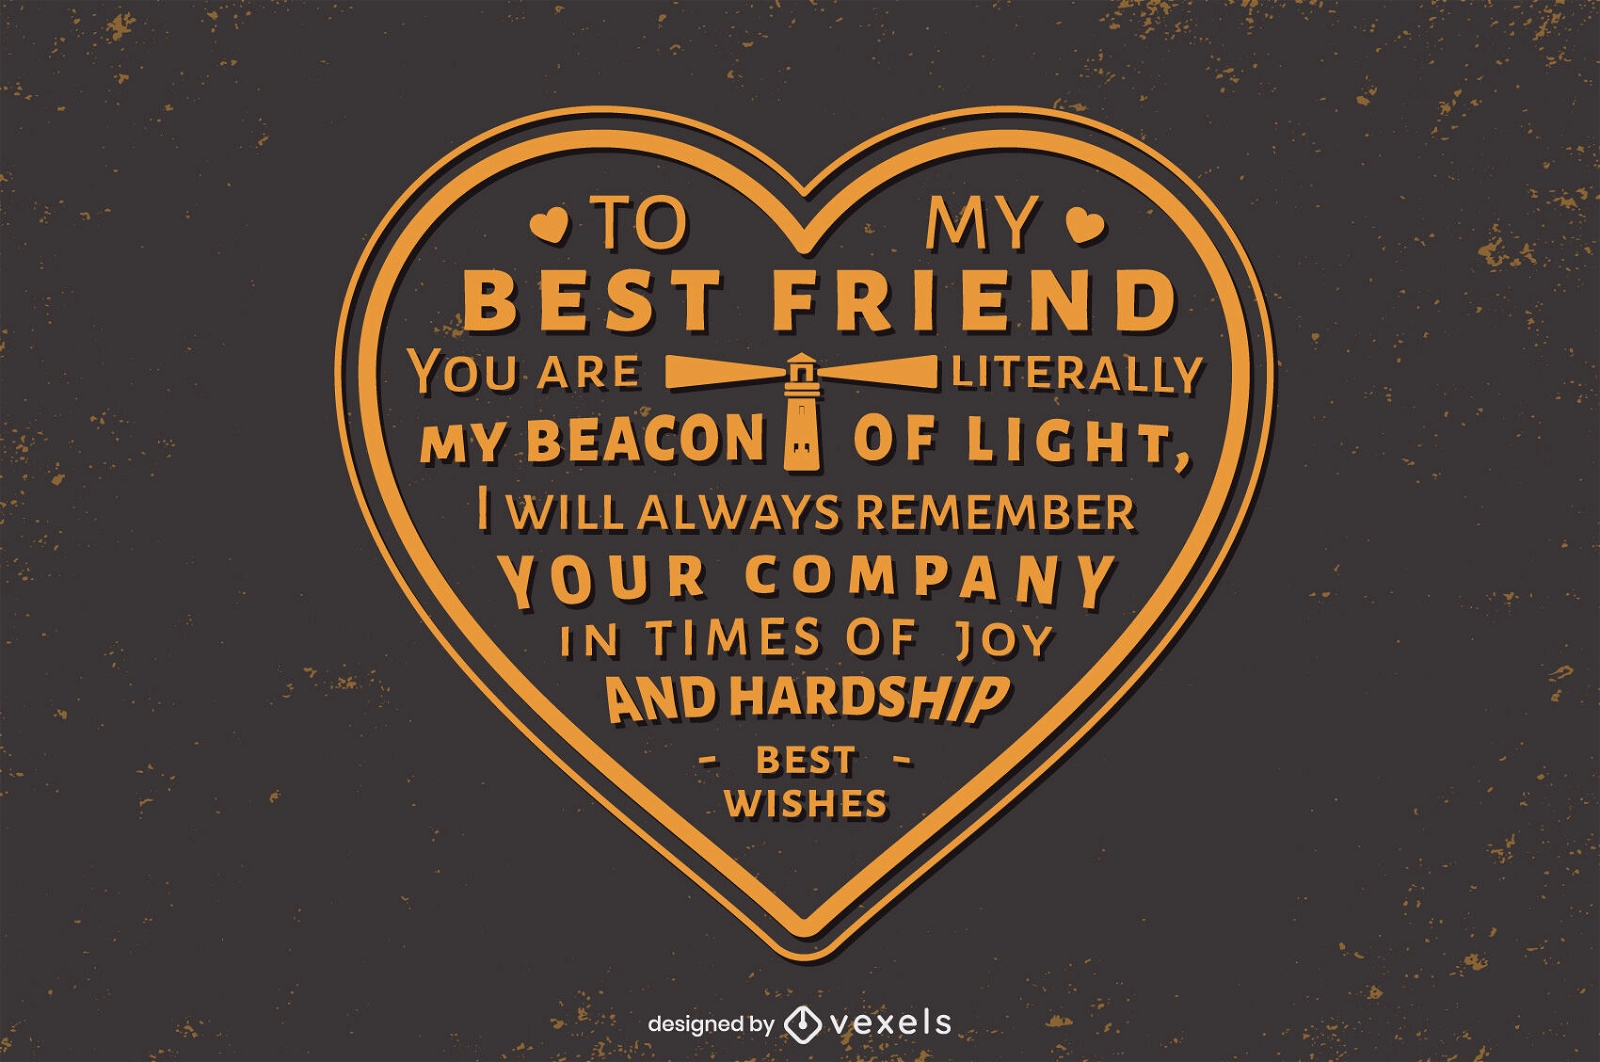 To my best friend heart quote